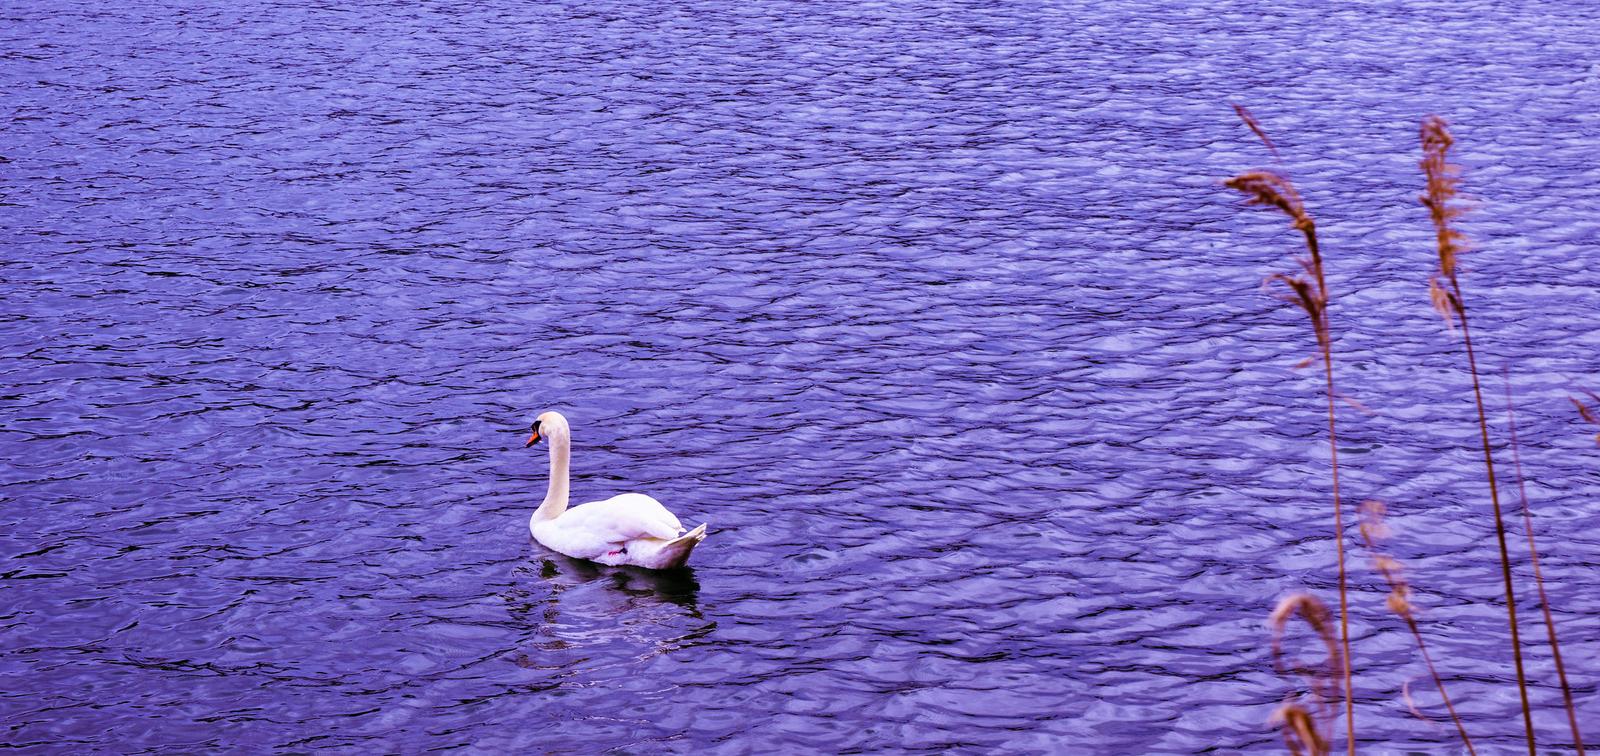 A Swan on Lake Bled